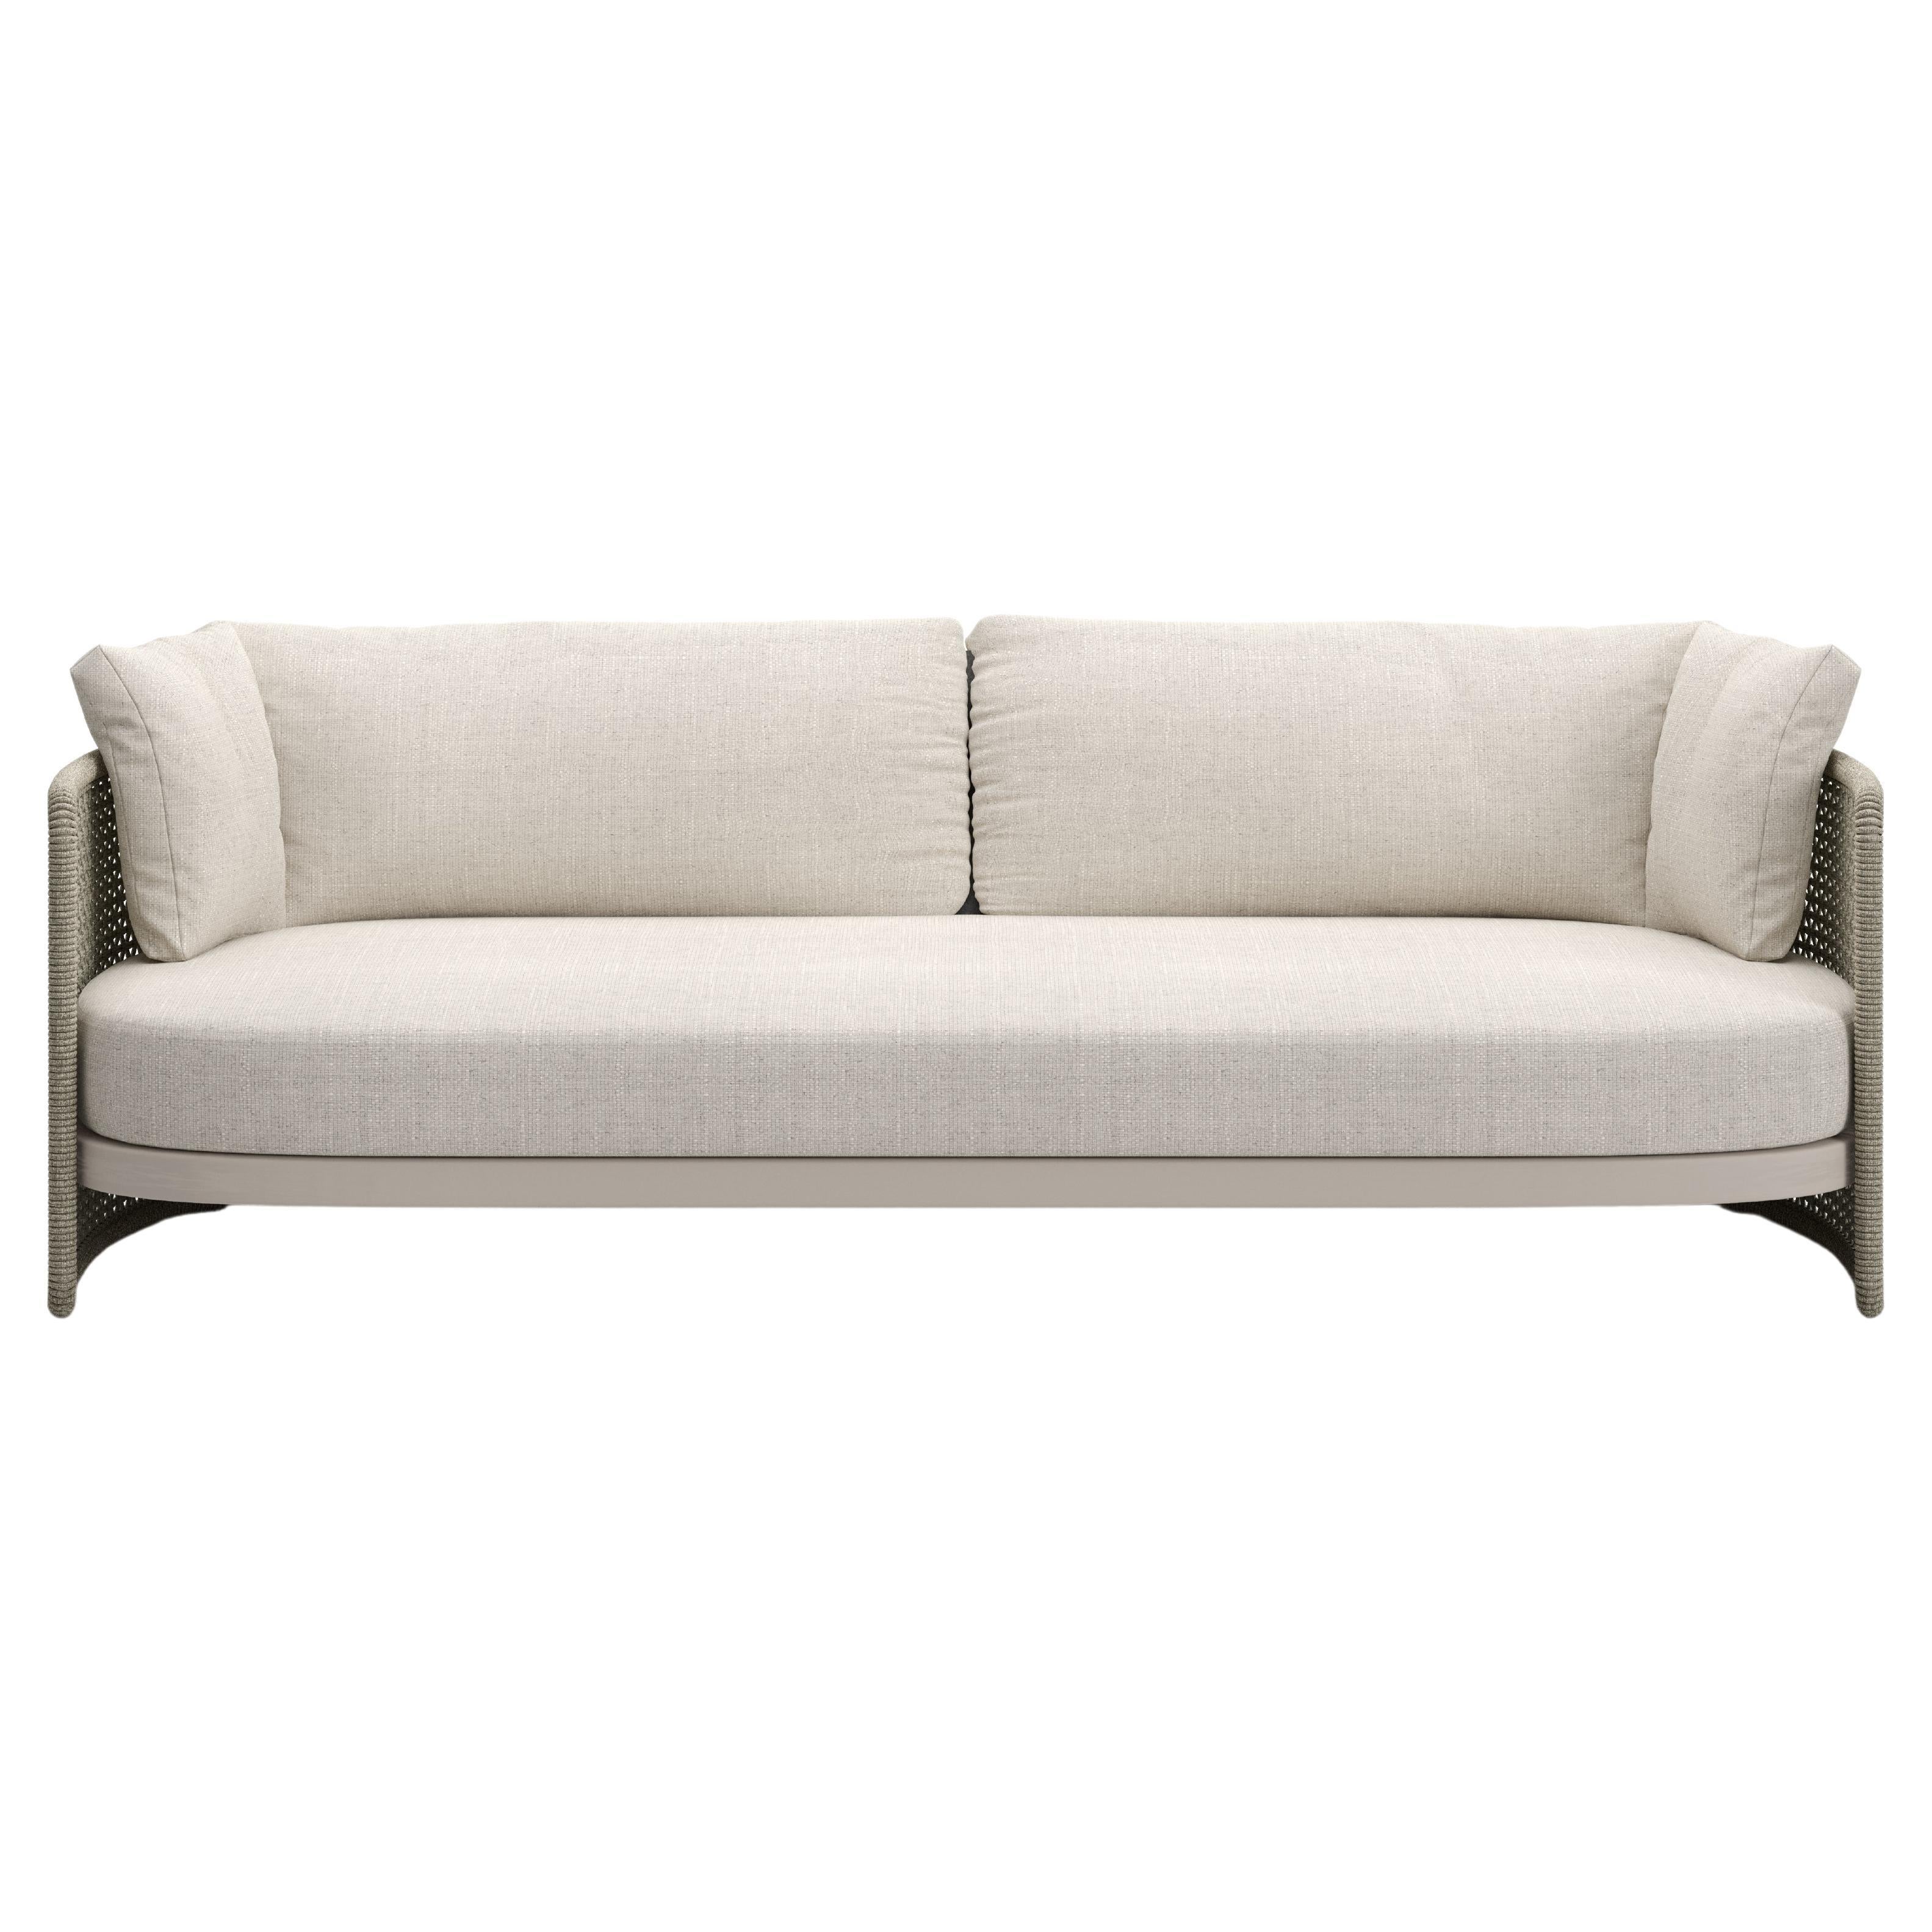 Miura-bisque Outdoor 3 Seater Sofa by SNOC For Sale